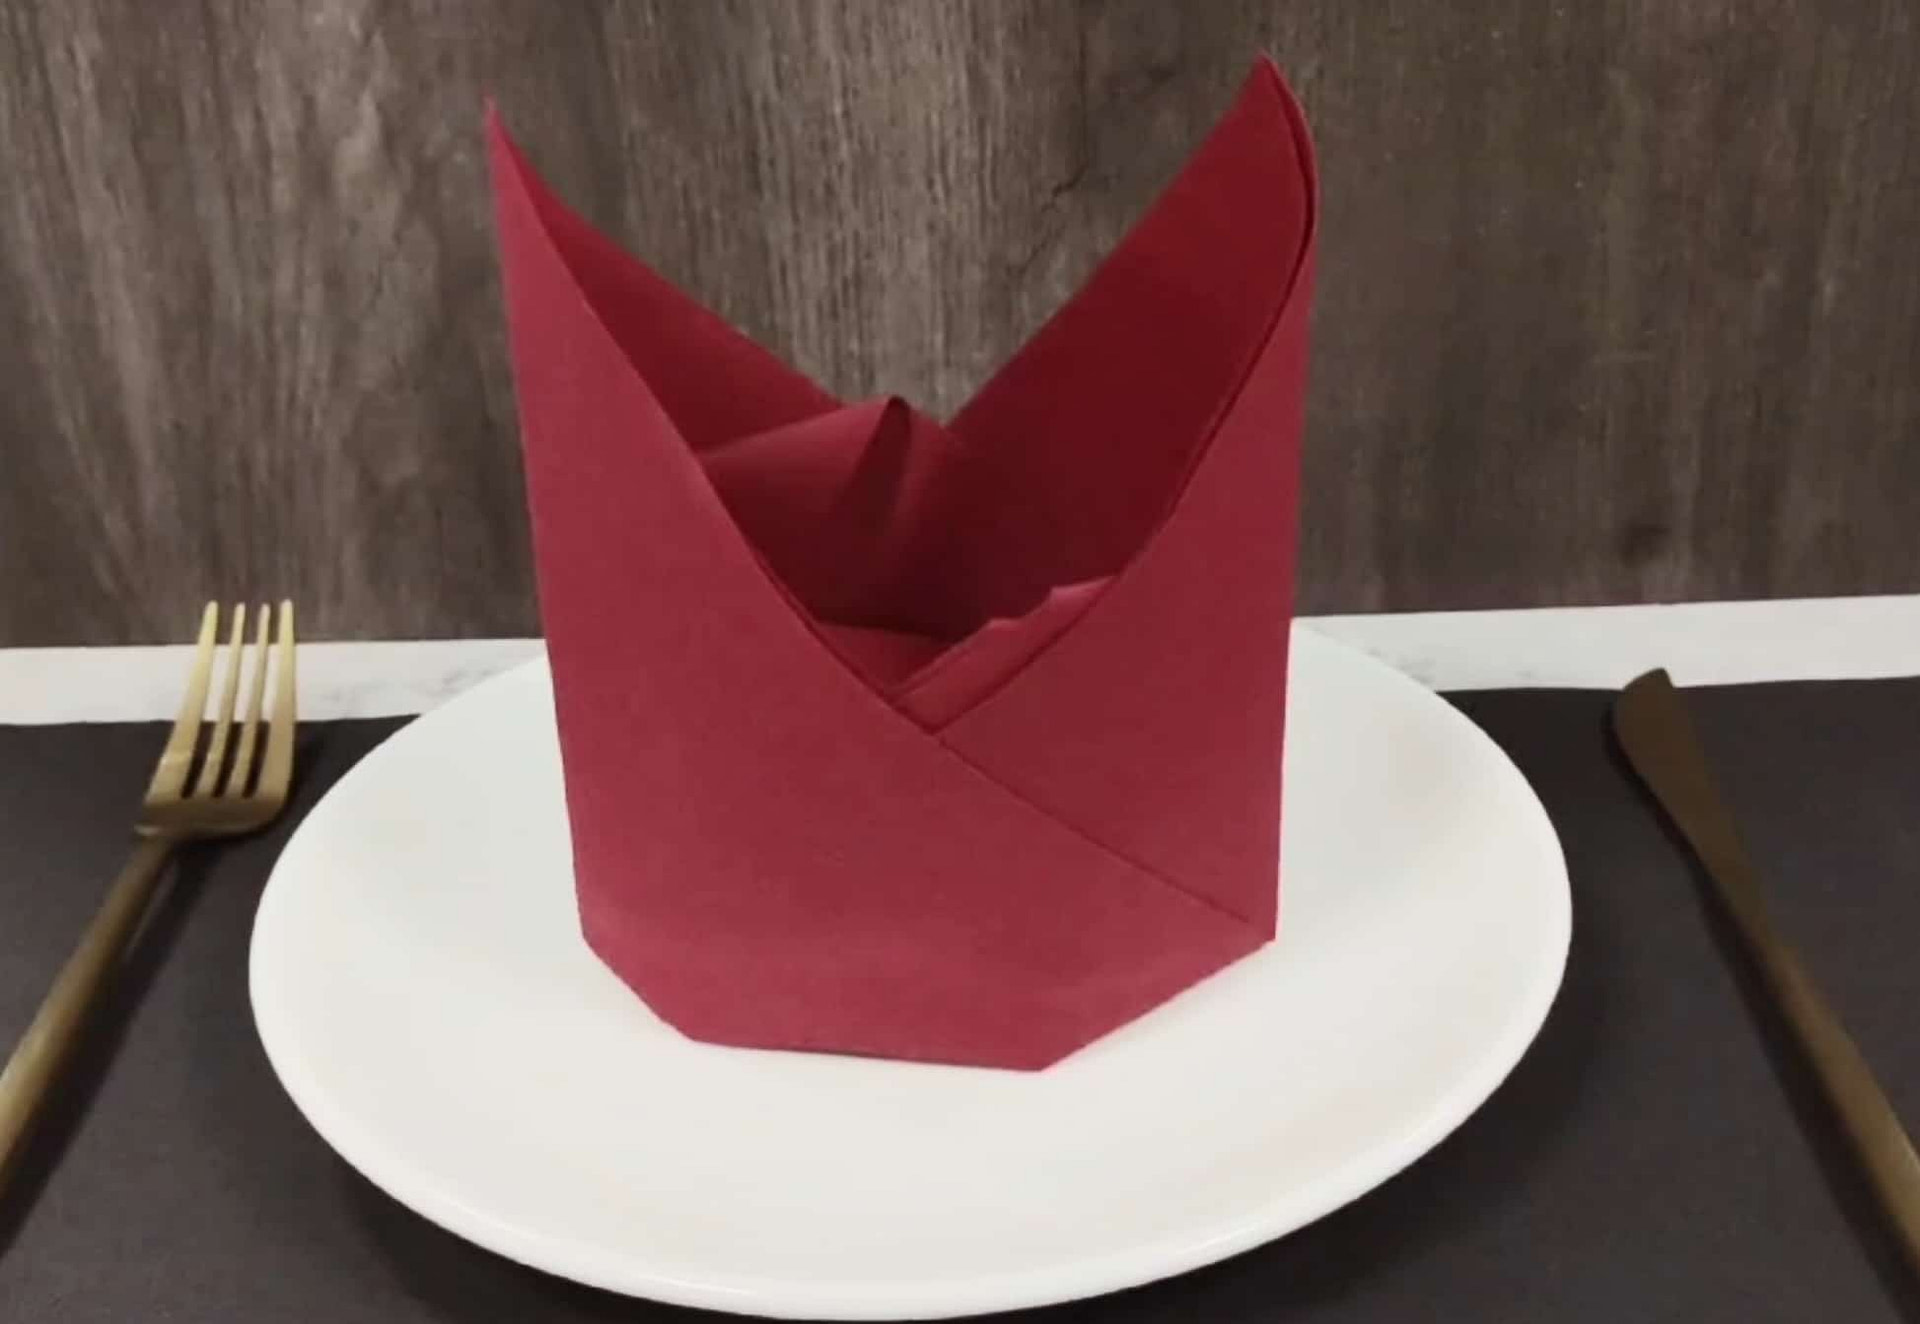 Impress Your Dinner Guests With This Easy and Elegant Napkin Fold